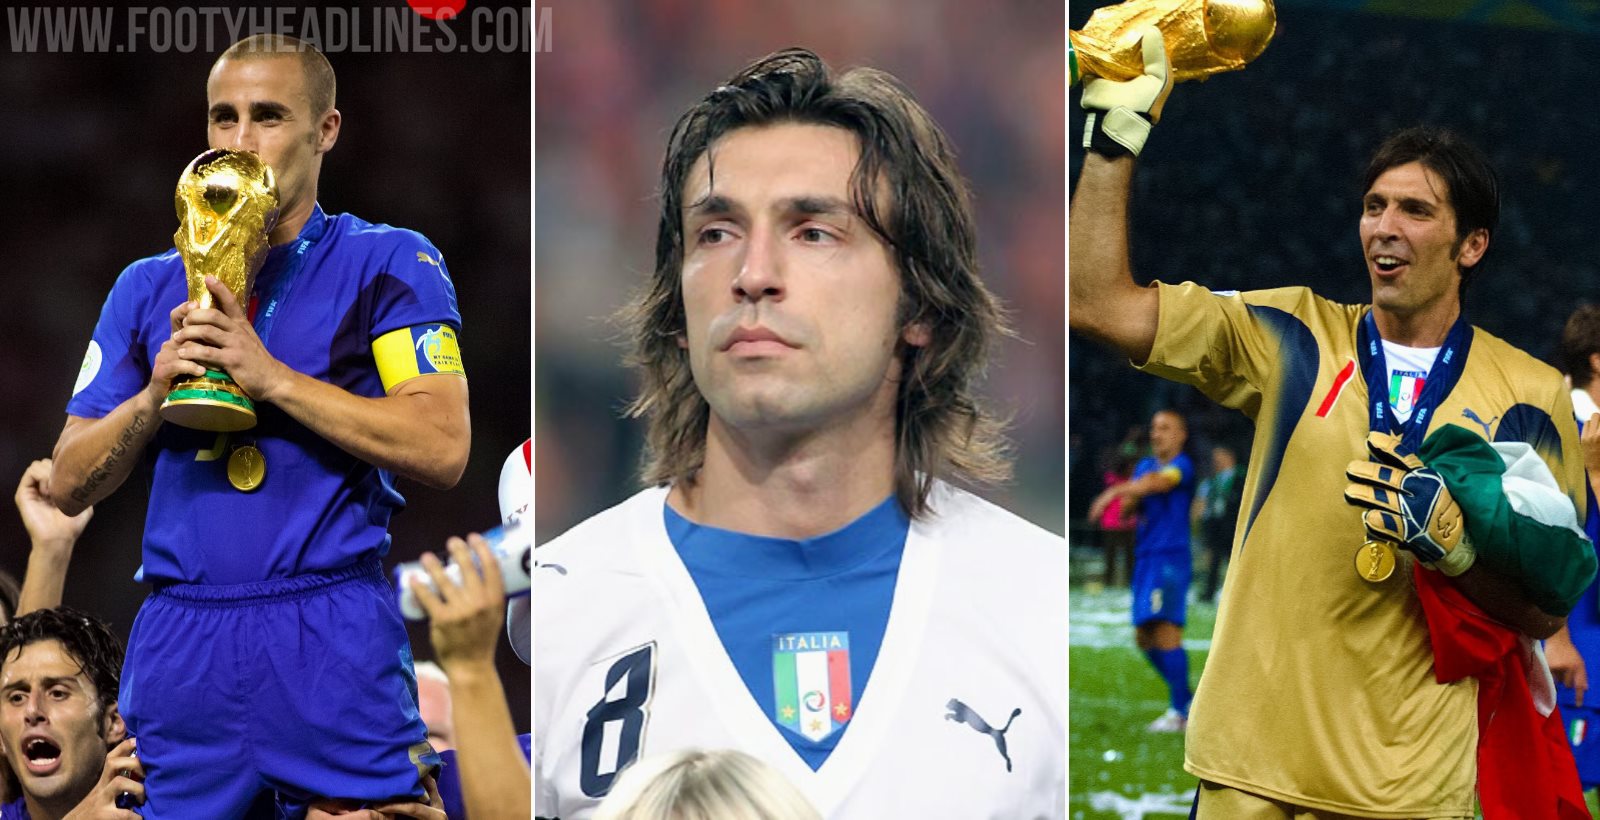 The Surprising Inspiration for Italy's 2006 World Cup Kits - Footy Headlines